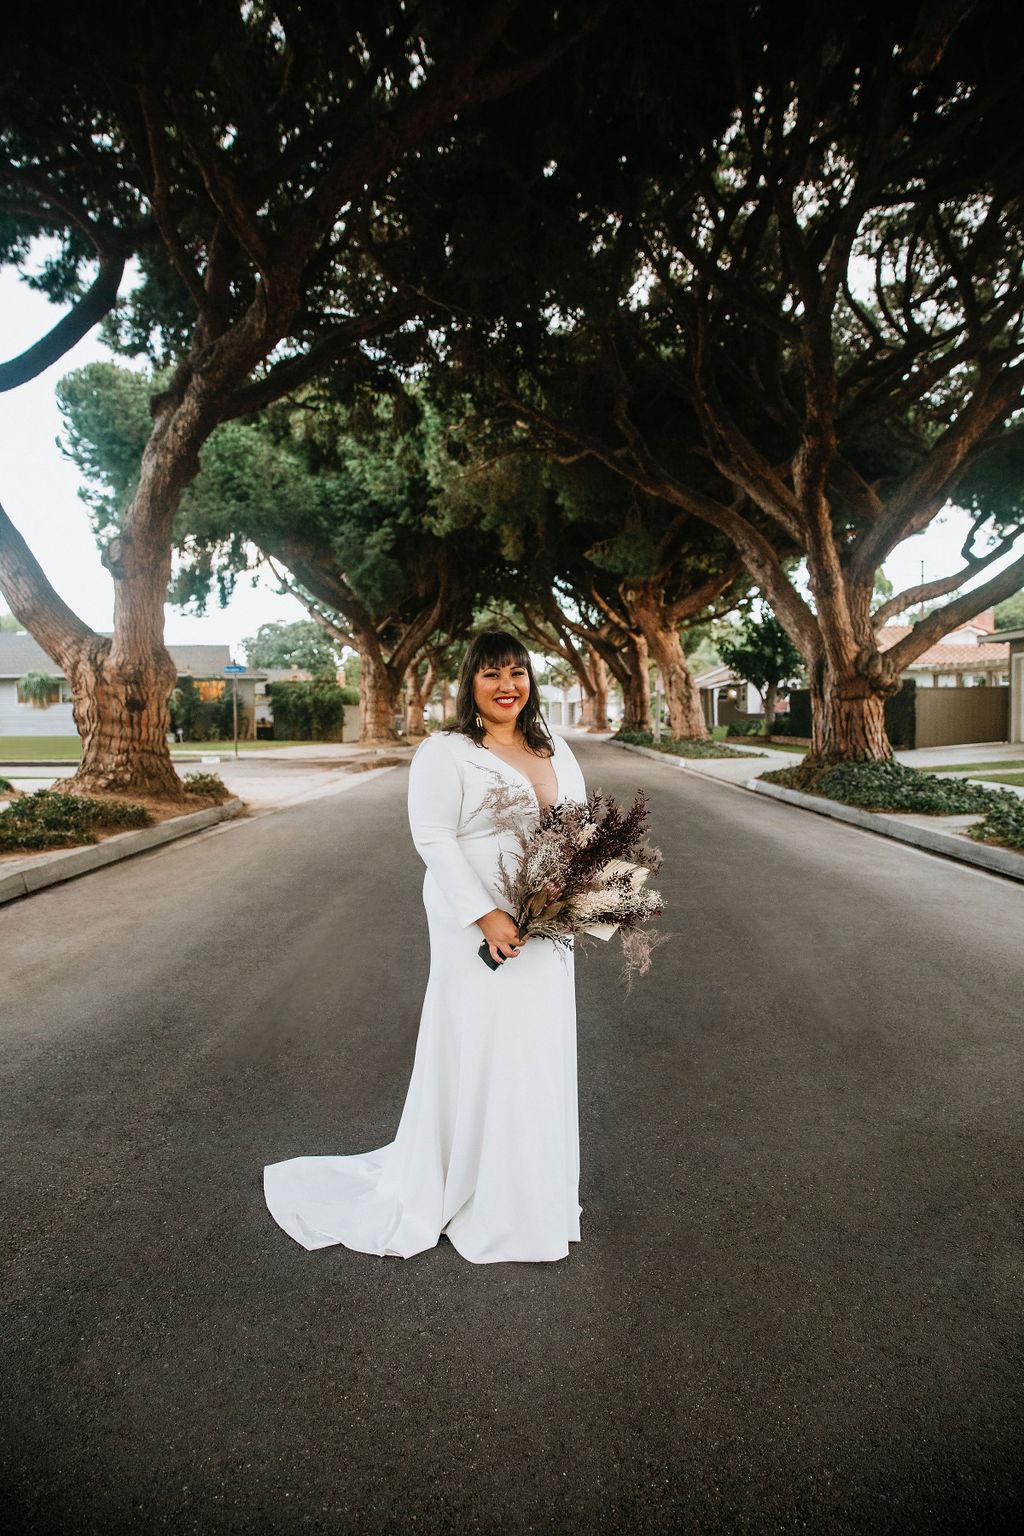 bride in long sleeve deep v-neck wedding dress holding bouquet of purple dried florals stands at ceremony site in the middle of a residential street under an urban canopy of trees